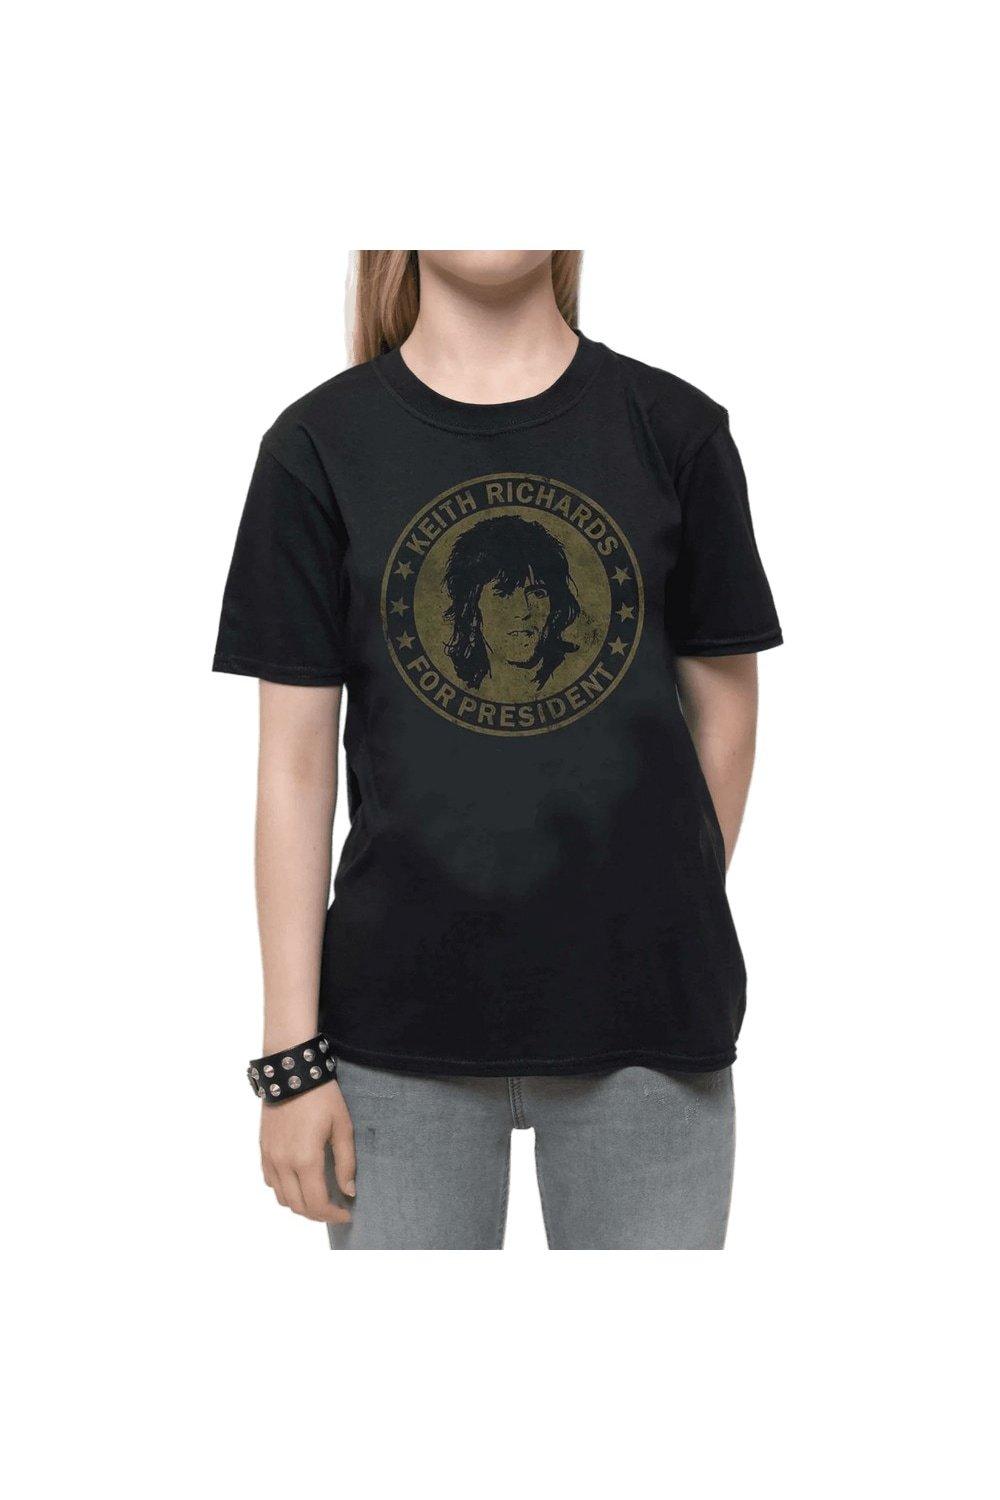 Keith For President T-Shirt